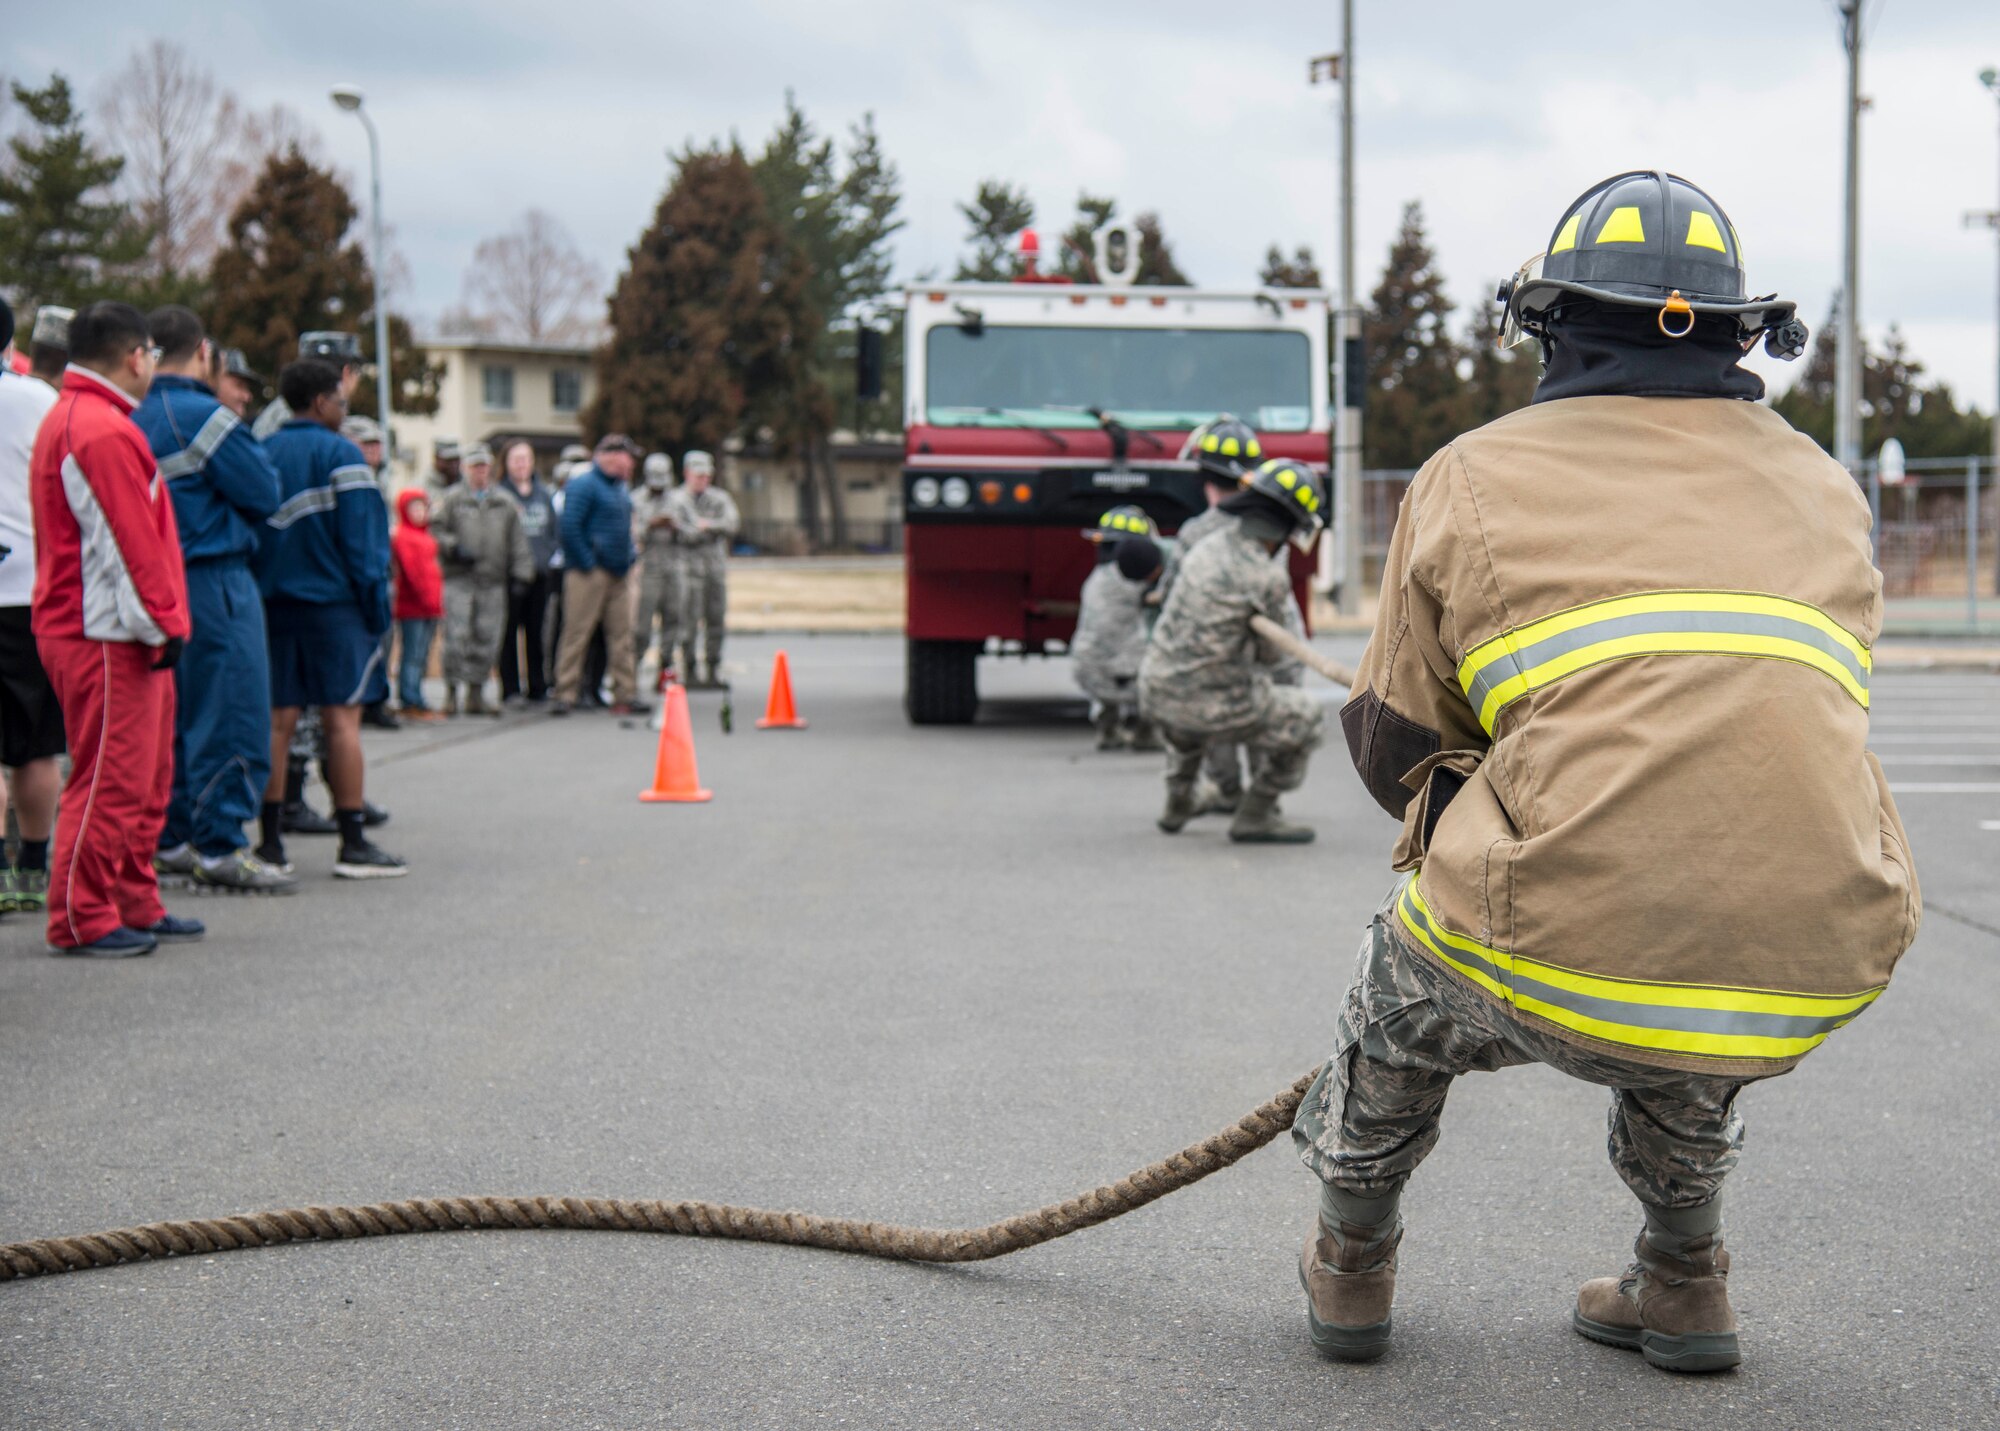 U.S. Air Force firefighters with the 35th Civil Engineer Squadron demonstrate pulling a firetruck during Wingman Day at Misawa Air Base, Japan, March 31, 2017. Wingman Day is held quarterly, and helps to enhance resiliency across the base. (U.S. Air Force Senior Airman Brittany A. Chase)